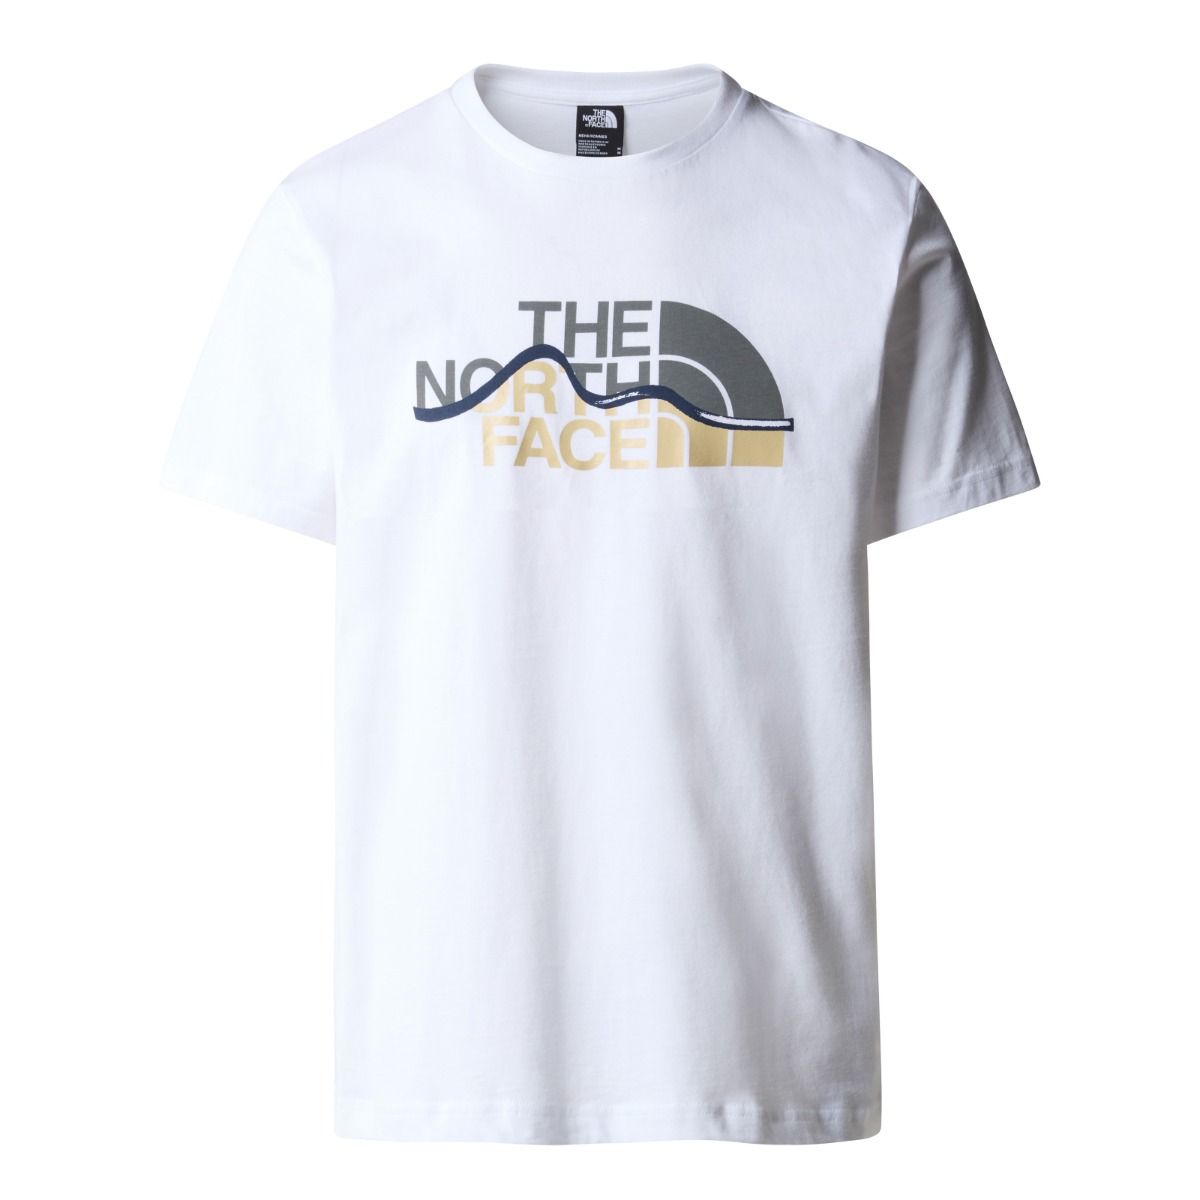 The North Face - M's S/S MOUNTAIN LINE TEE